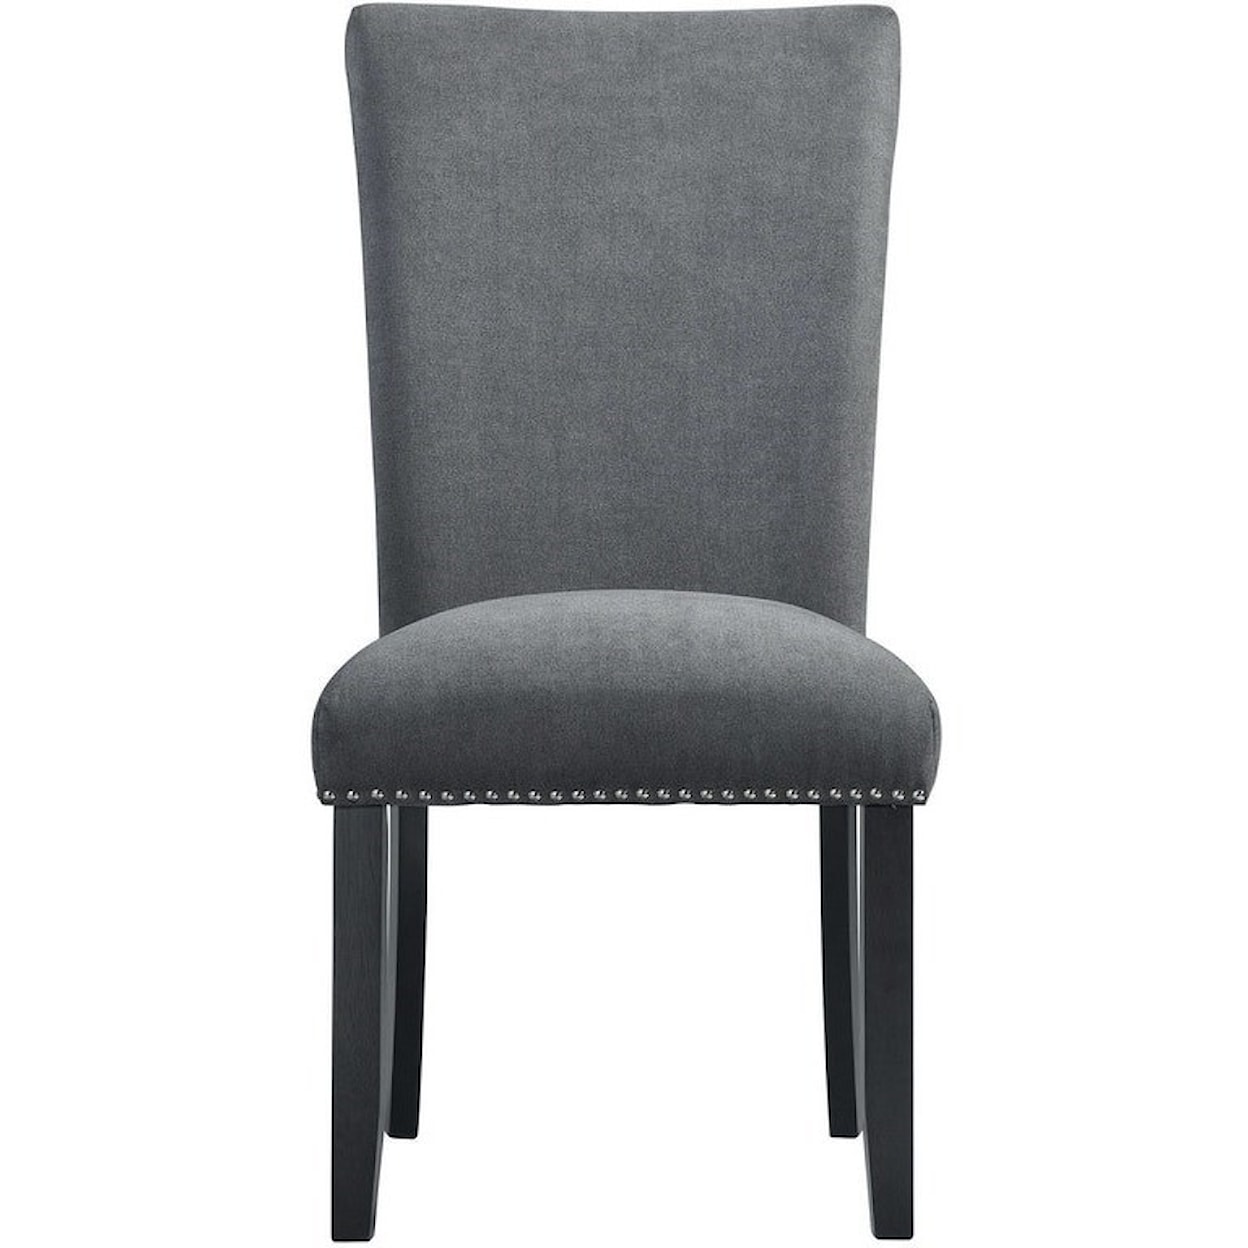 Elements International Tuscany Upholstered Side Chair